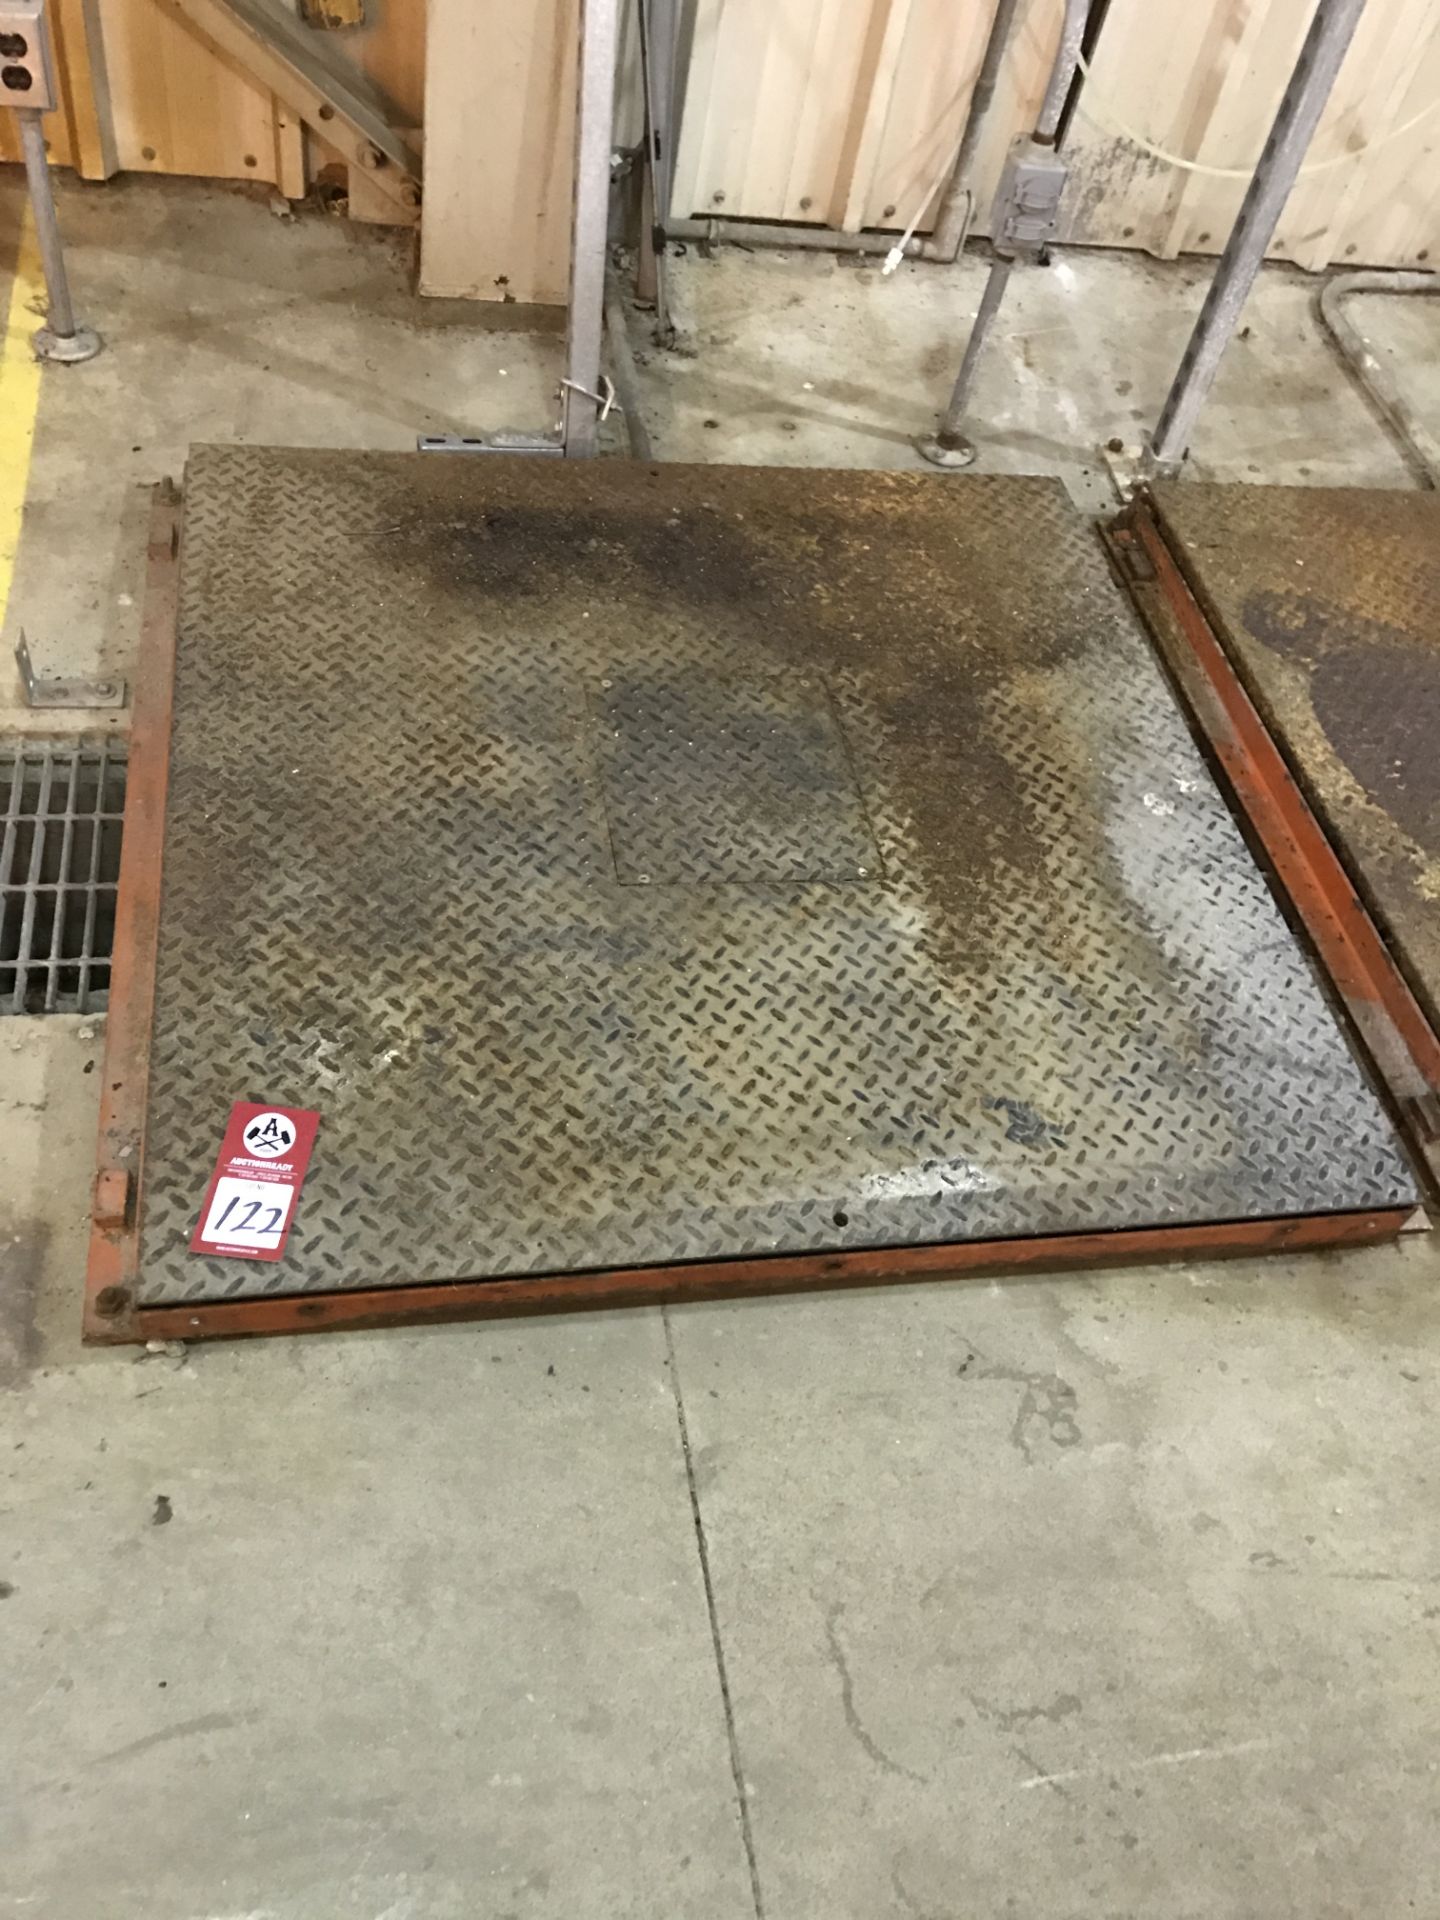 Floor Scale, Masstron 48" x 48", no read out